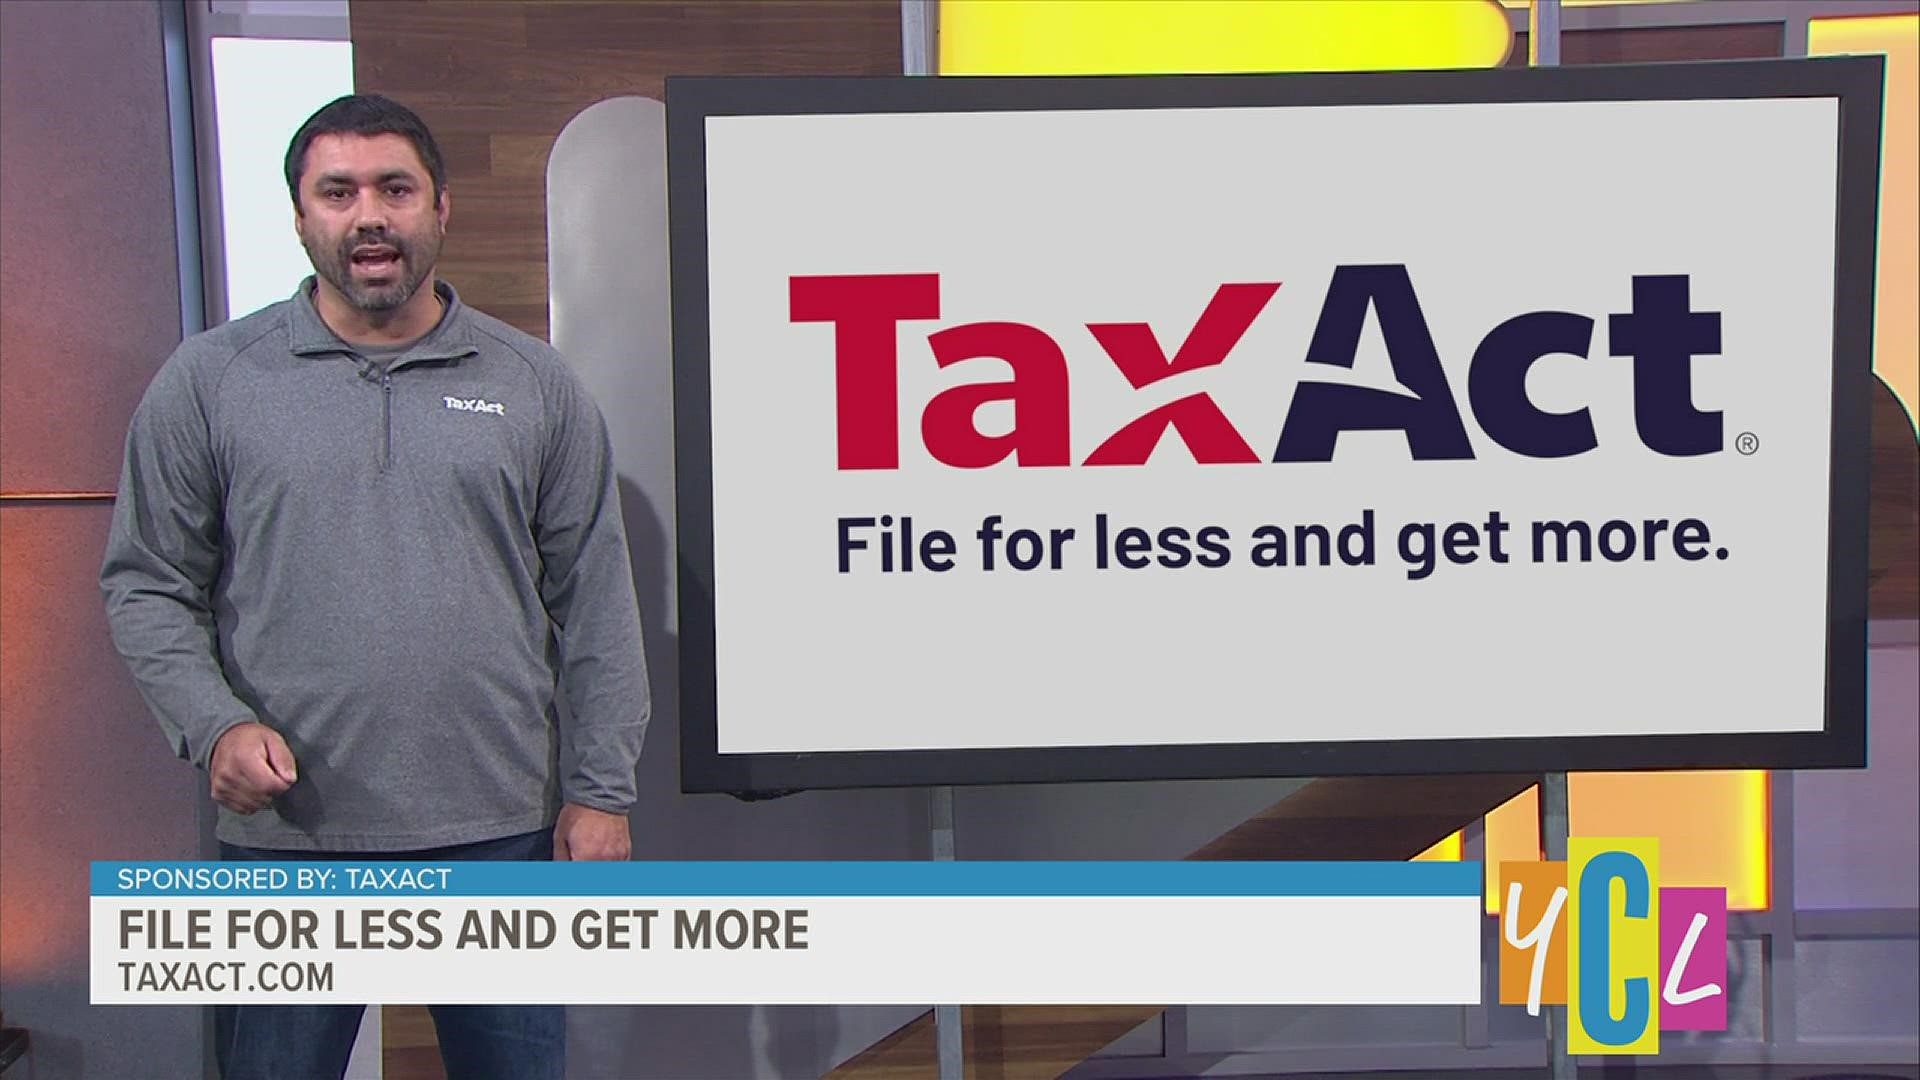 Tax season is upon us and although it may be a pain to file, TaxAct believes everyone should be empowered to do their own taxes. This segment is paid by TaxAct.